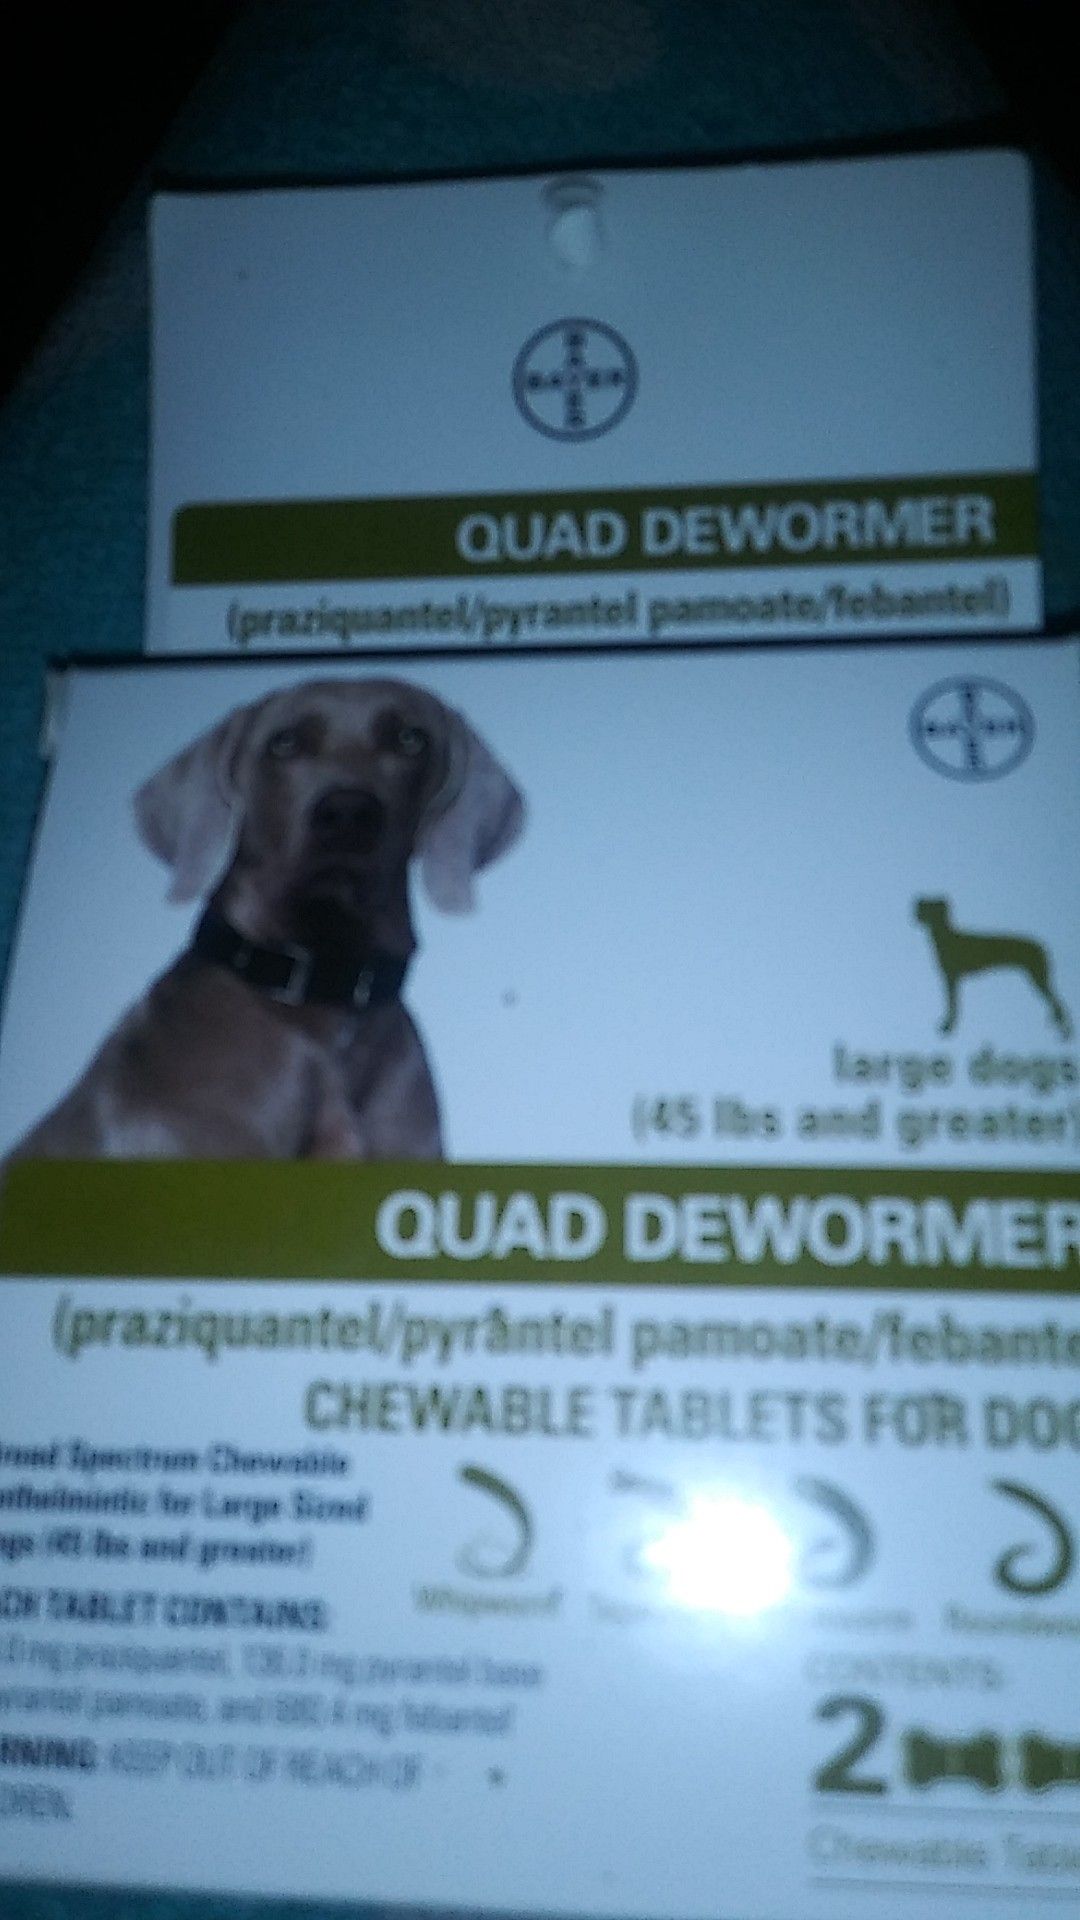 Dewormer for dogs